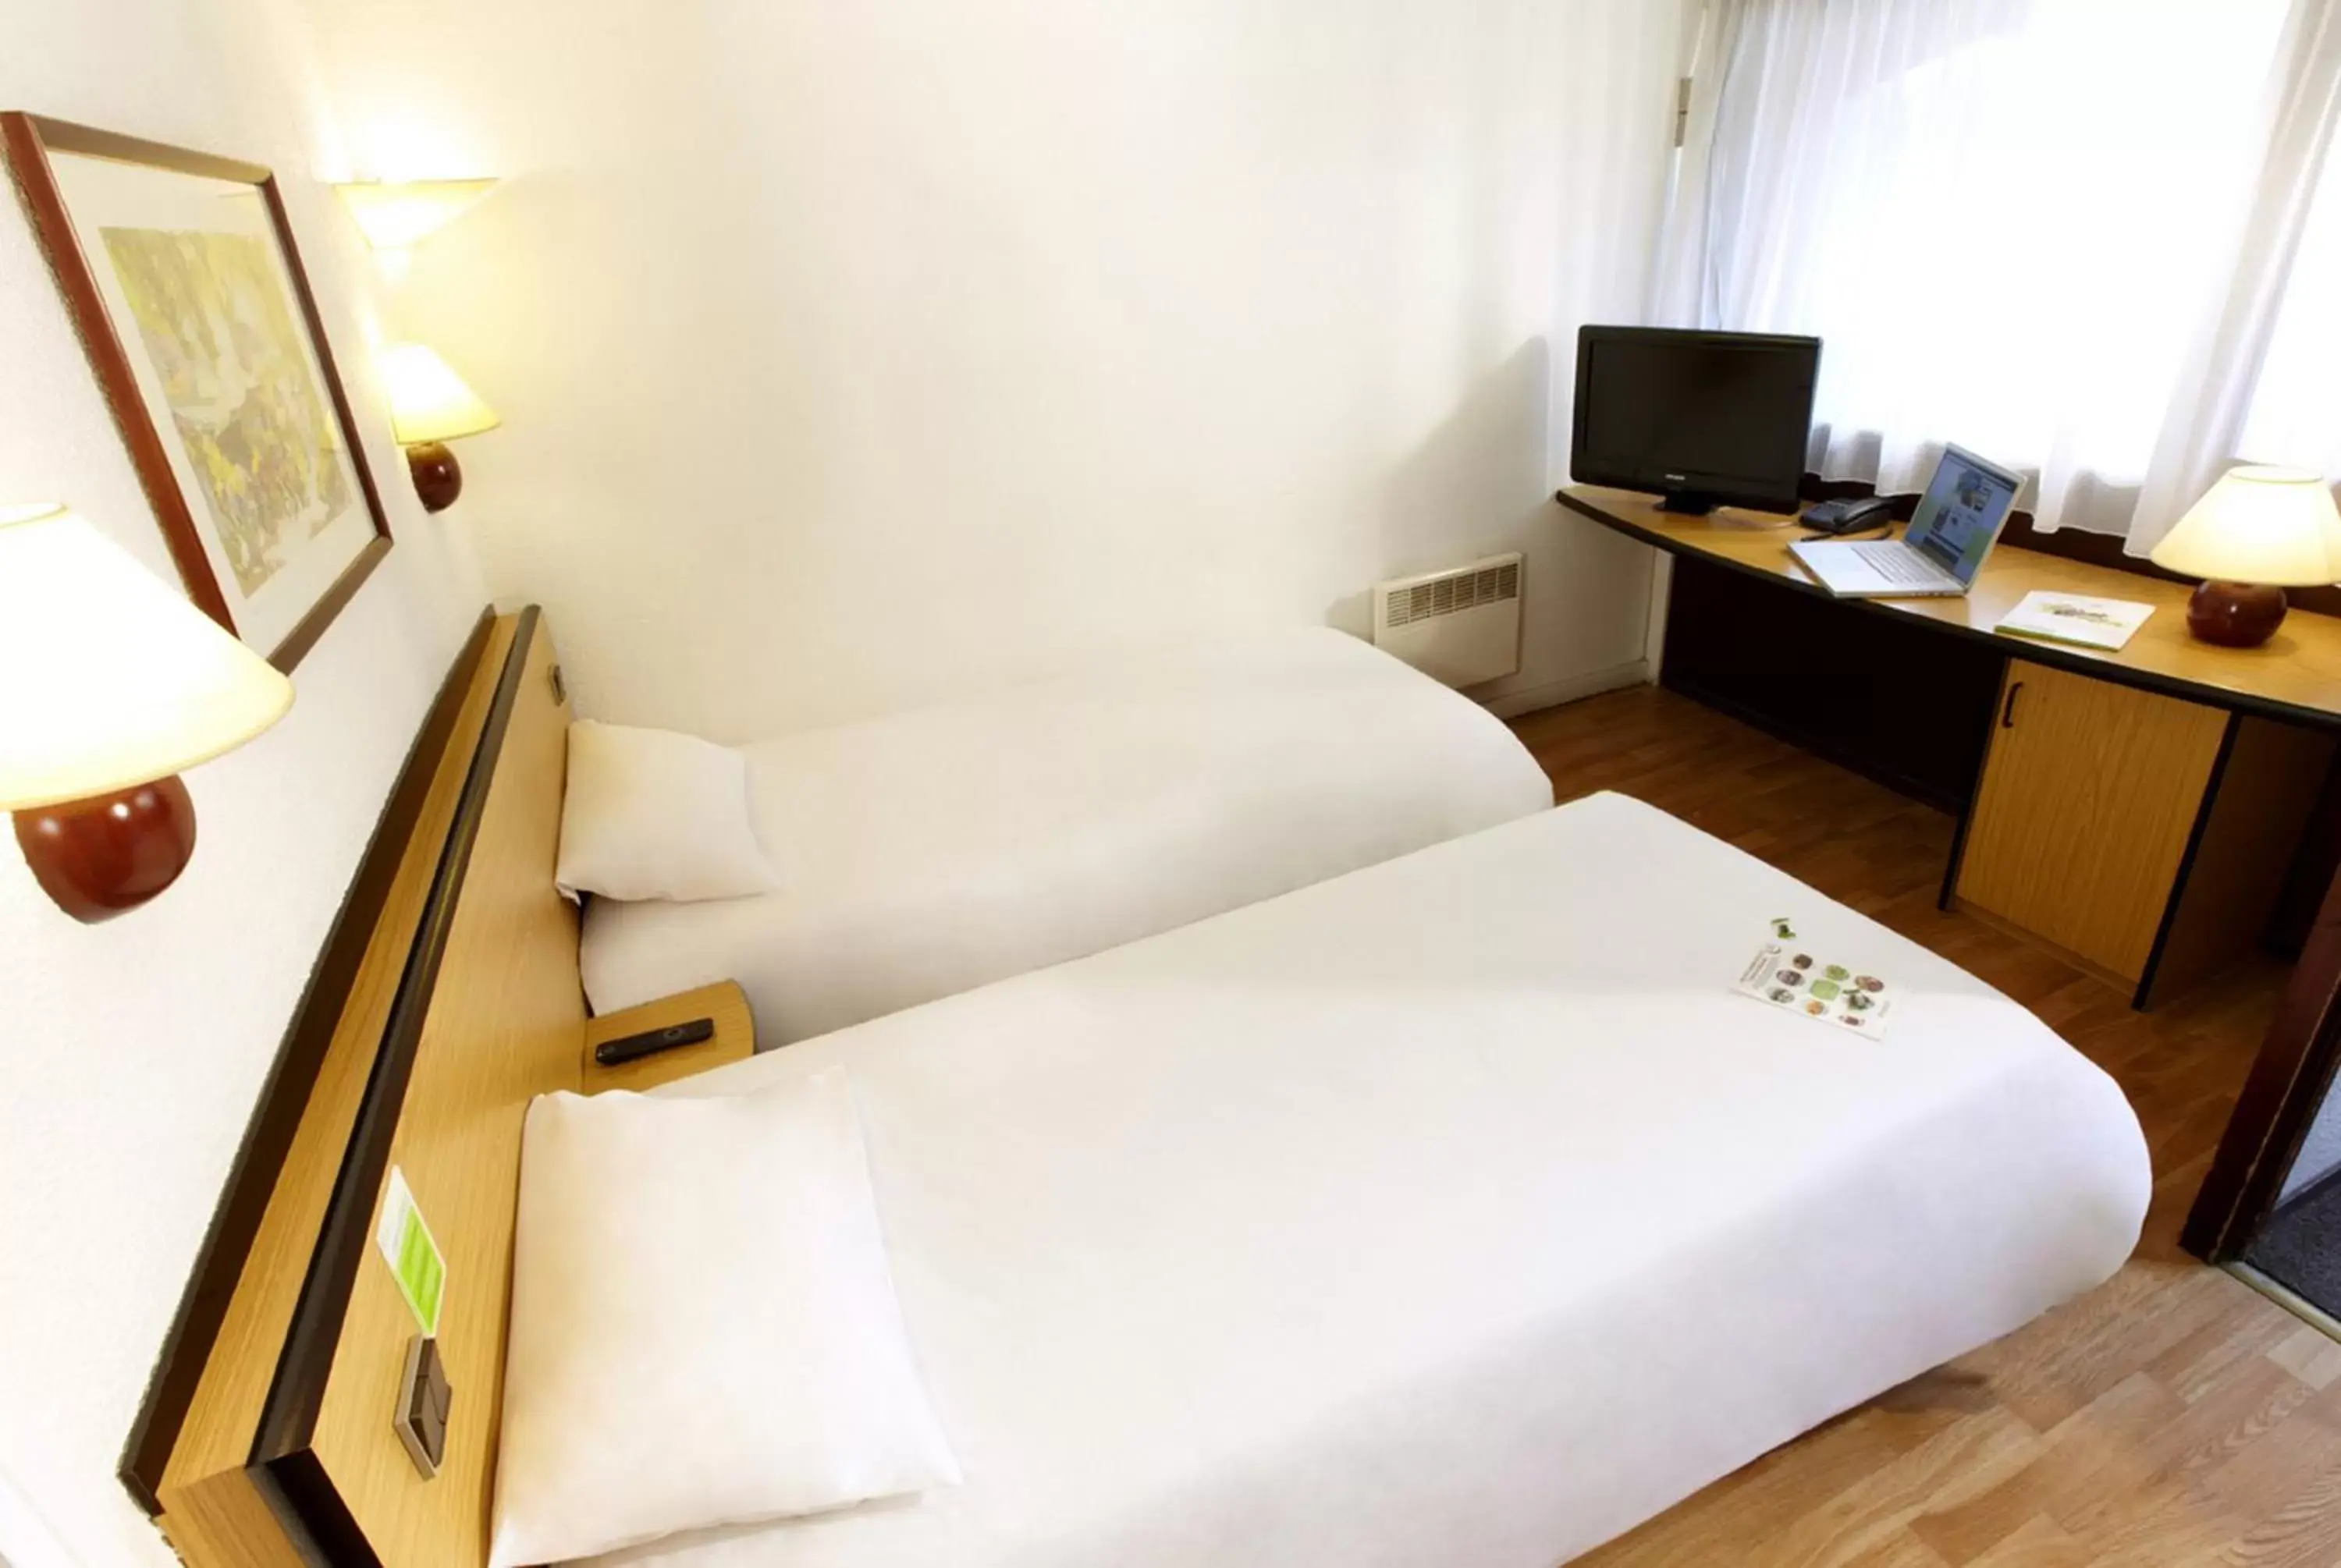 Bed, Room Photo in Campanile Hotel & Restaurant Gent